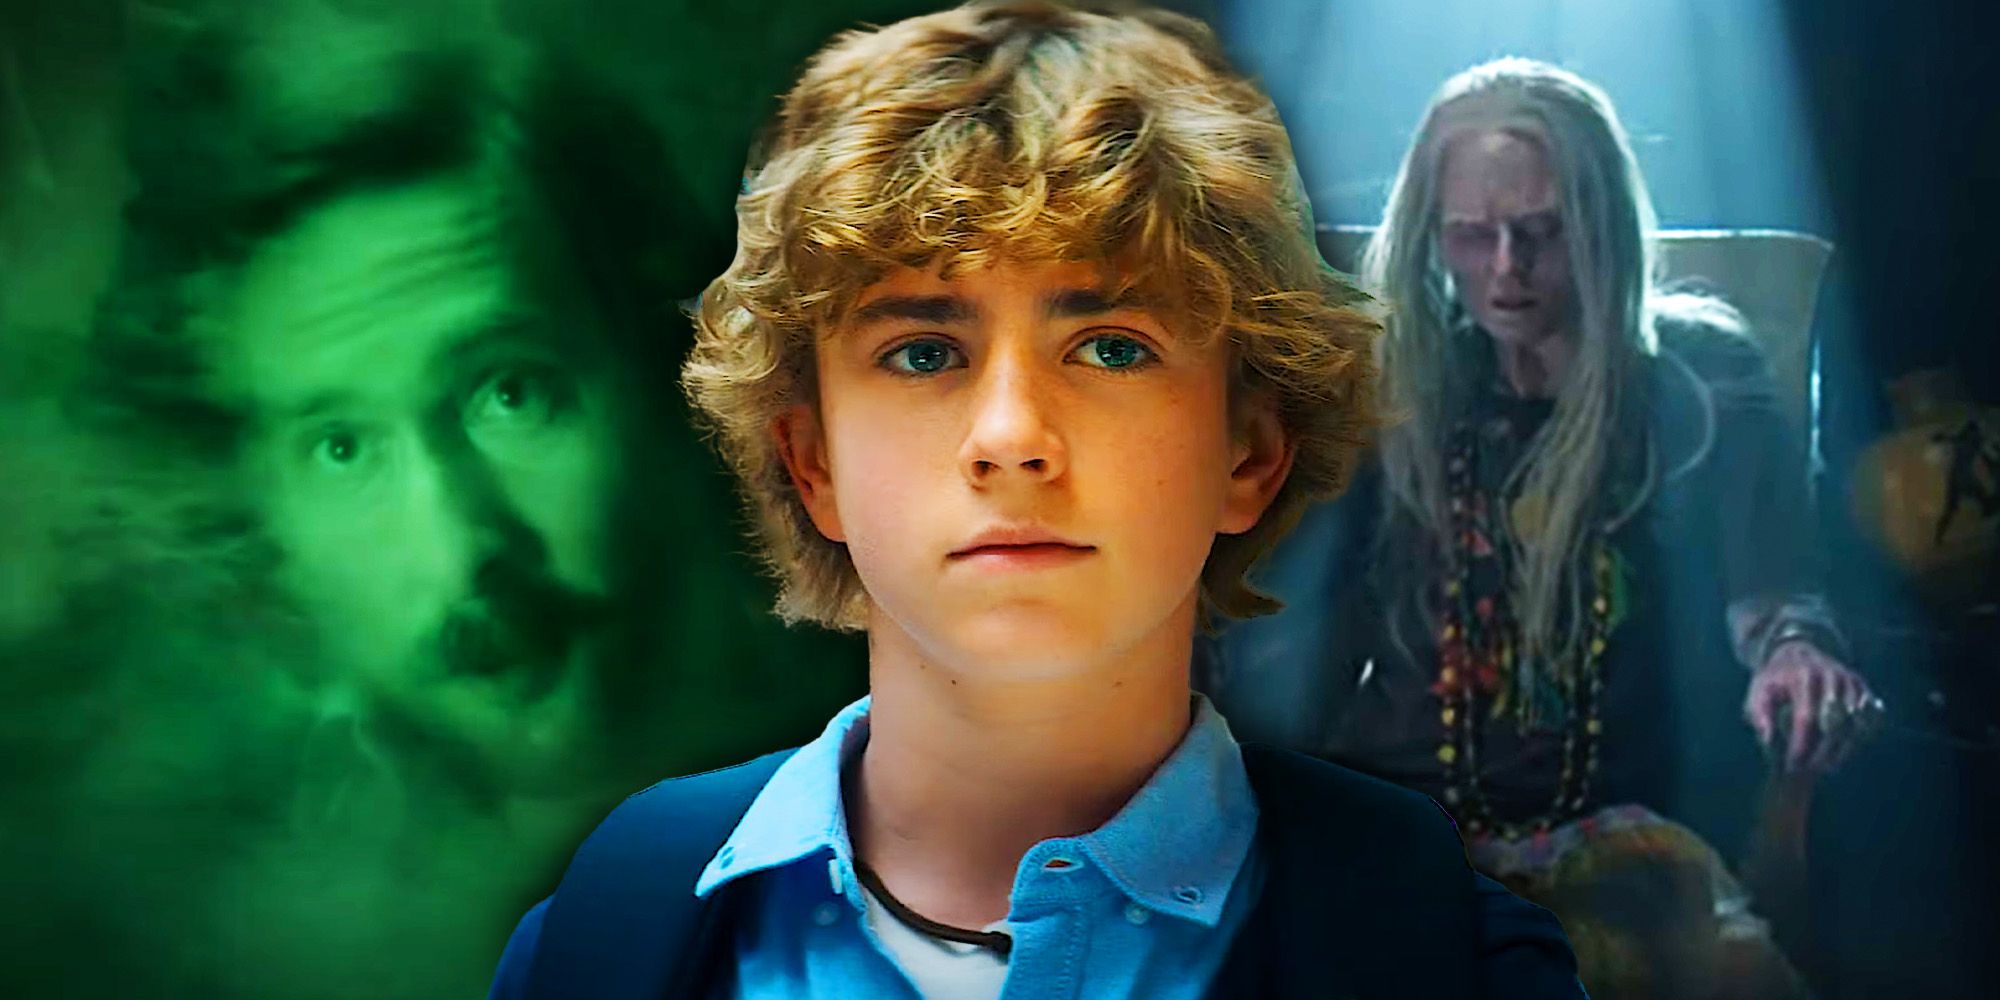 Walker Scobell as Percy Jackson in Percy Jackson & the Olympians in front of an image of Timm Sharp as Gabe in green smoke and the Oracle of Delphi